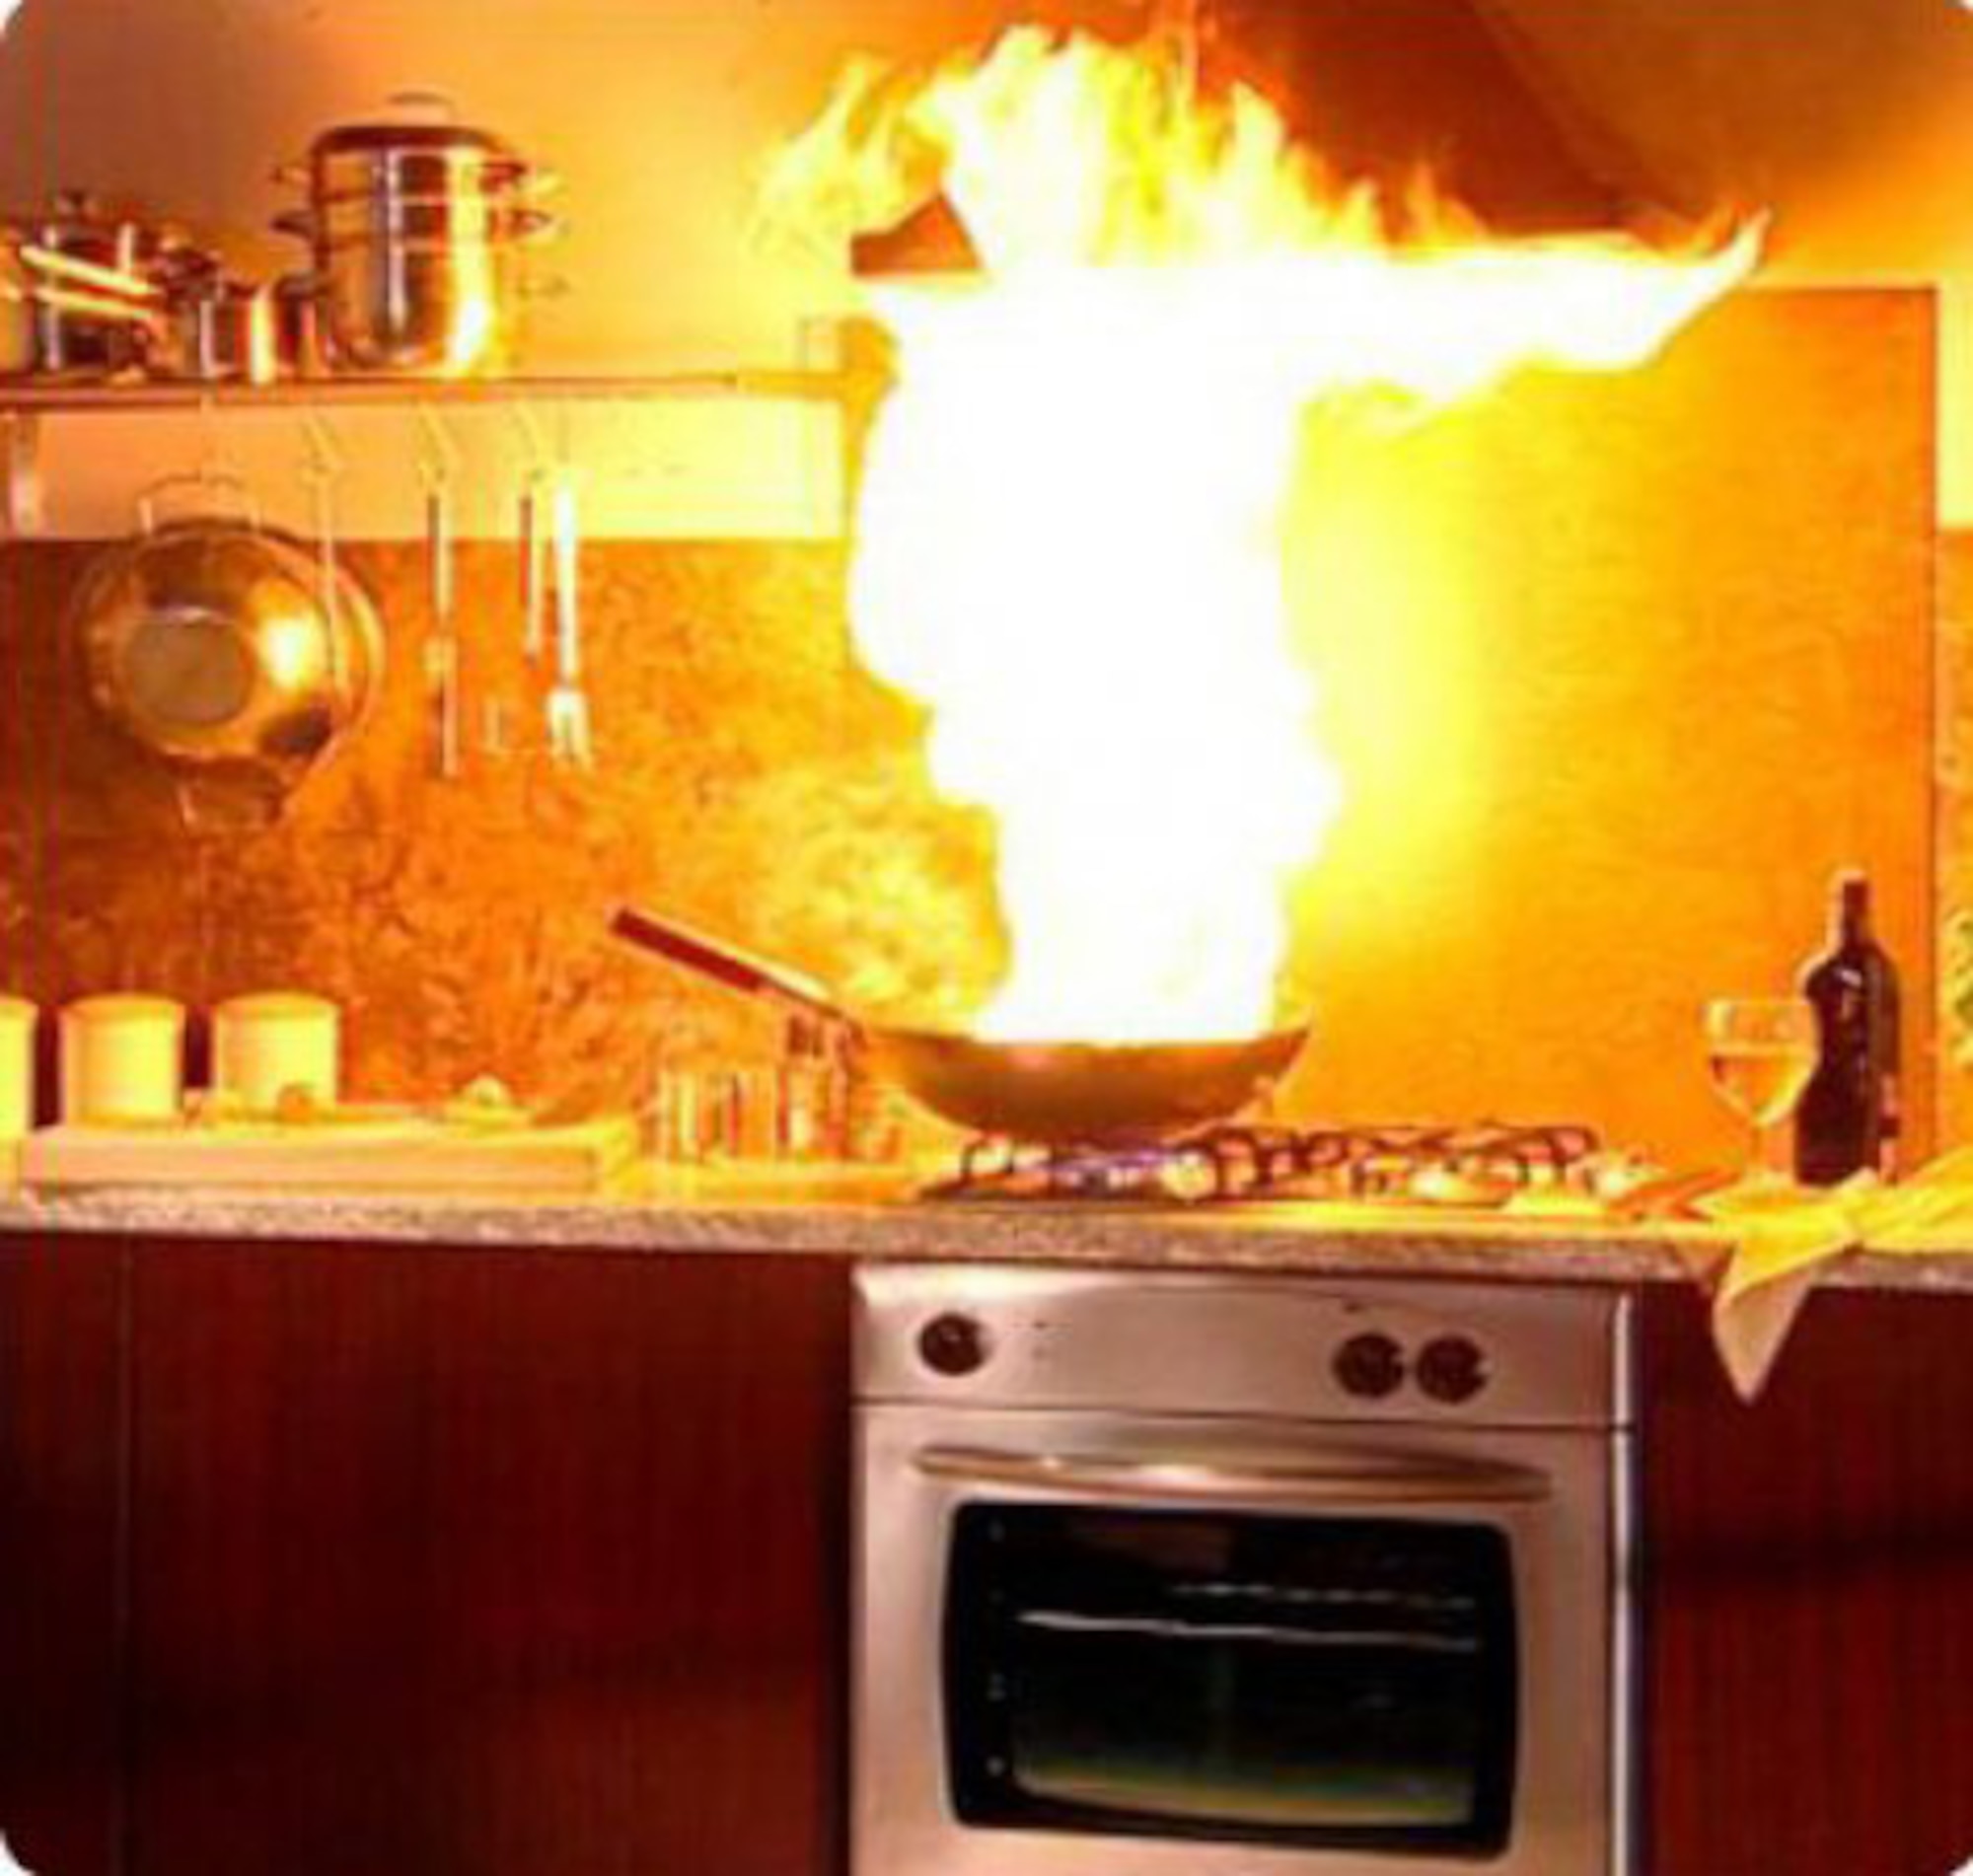 A fire blazes in a pan on a stove. (Courtesy photo)